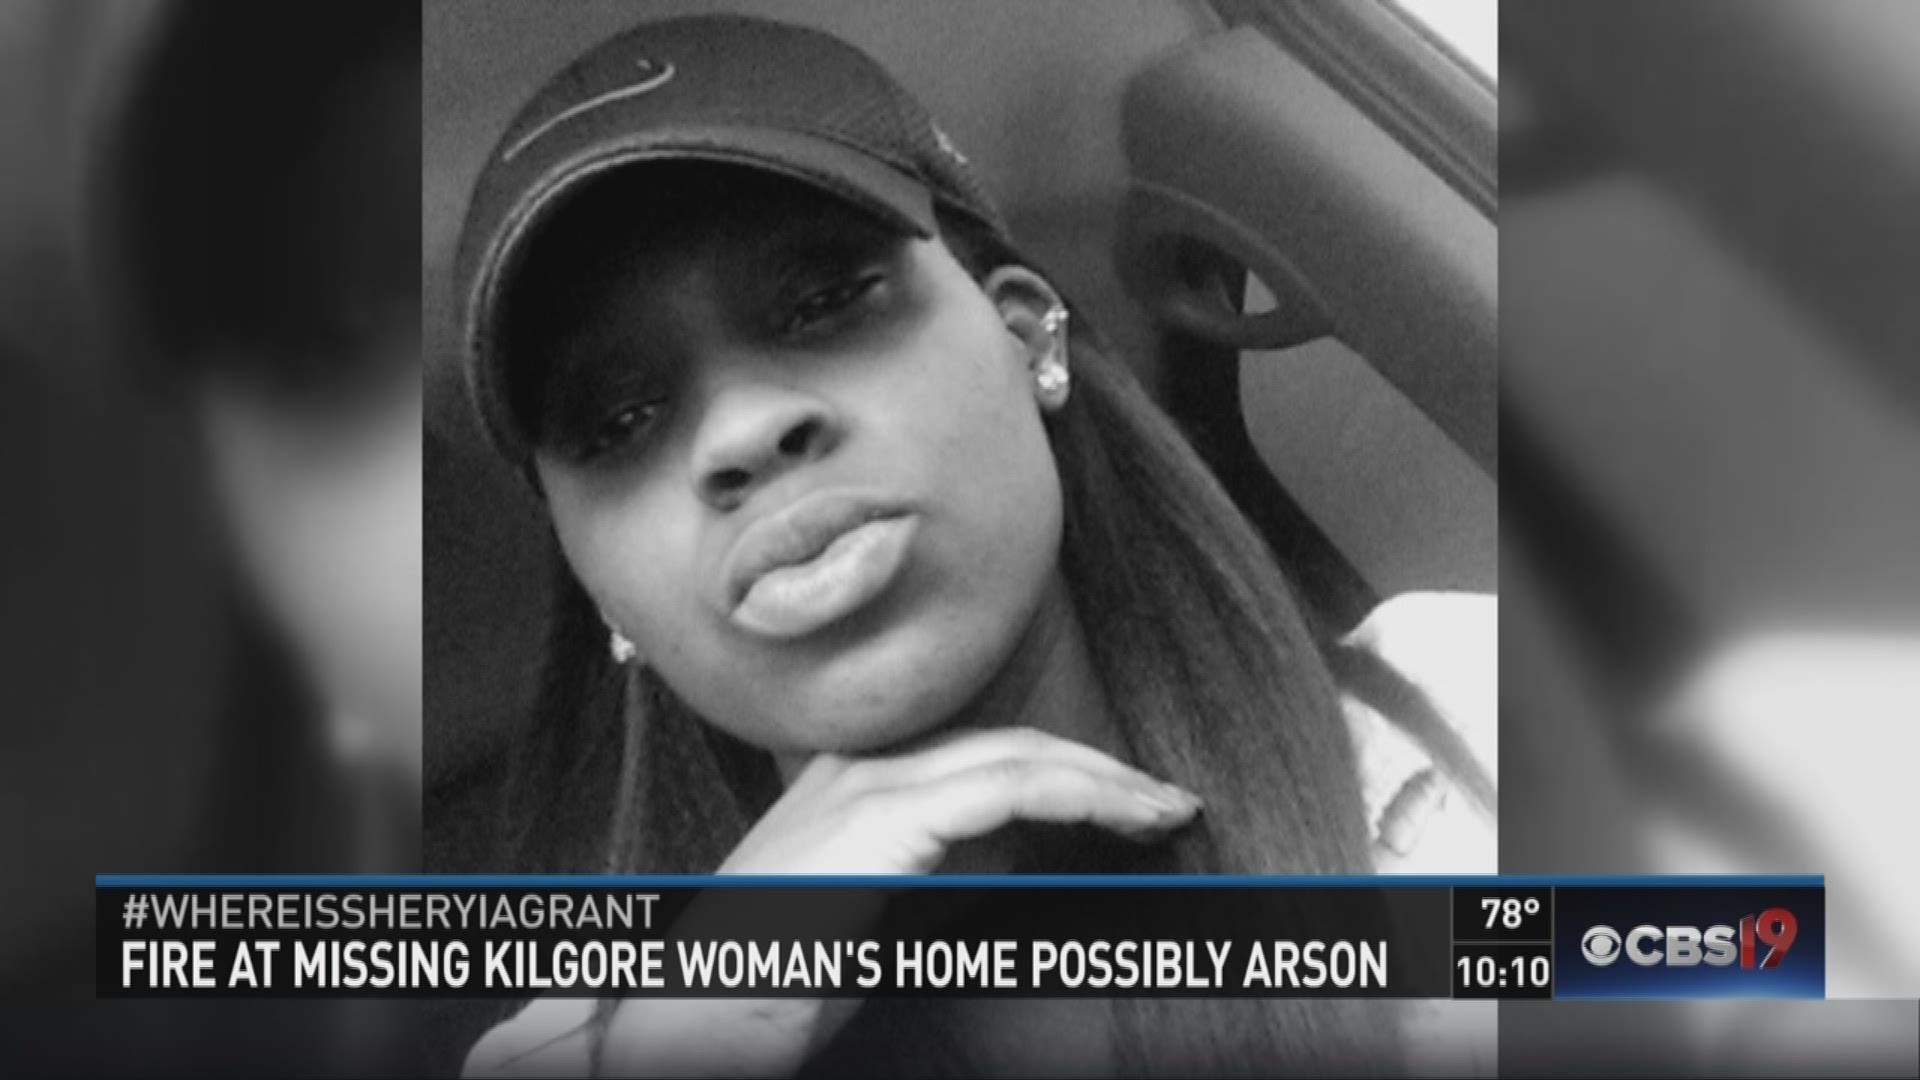 Fire at missing Kilgore woman's home possibly arson